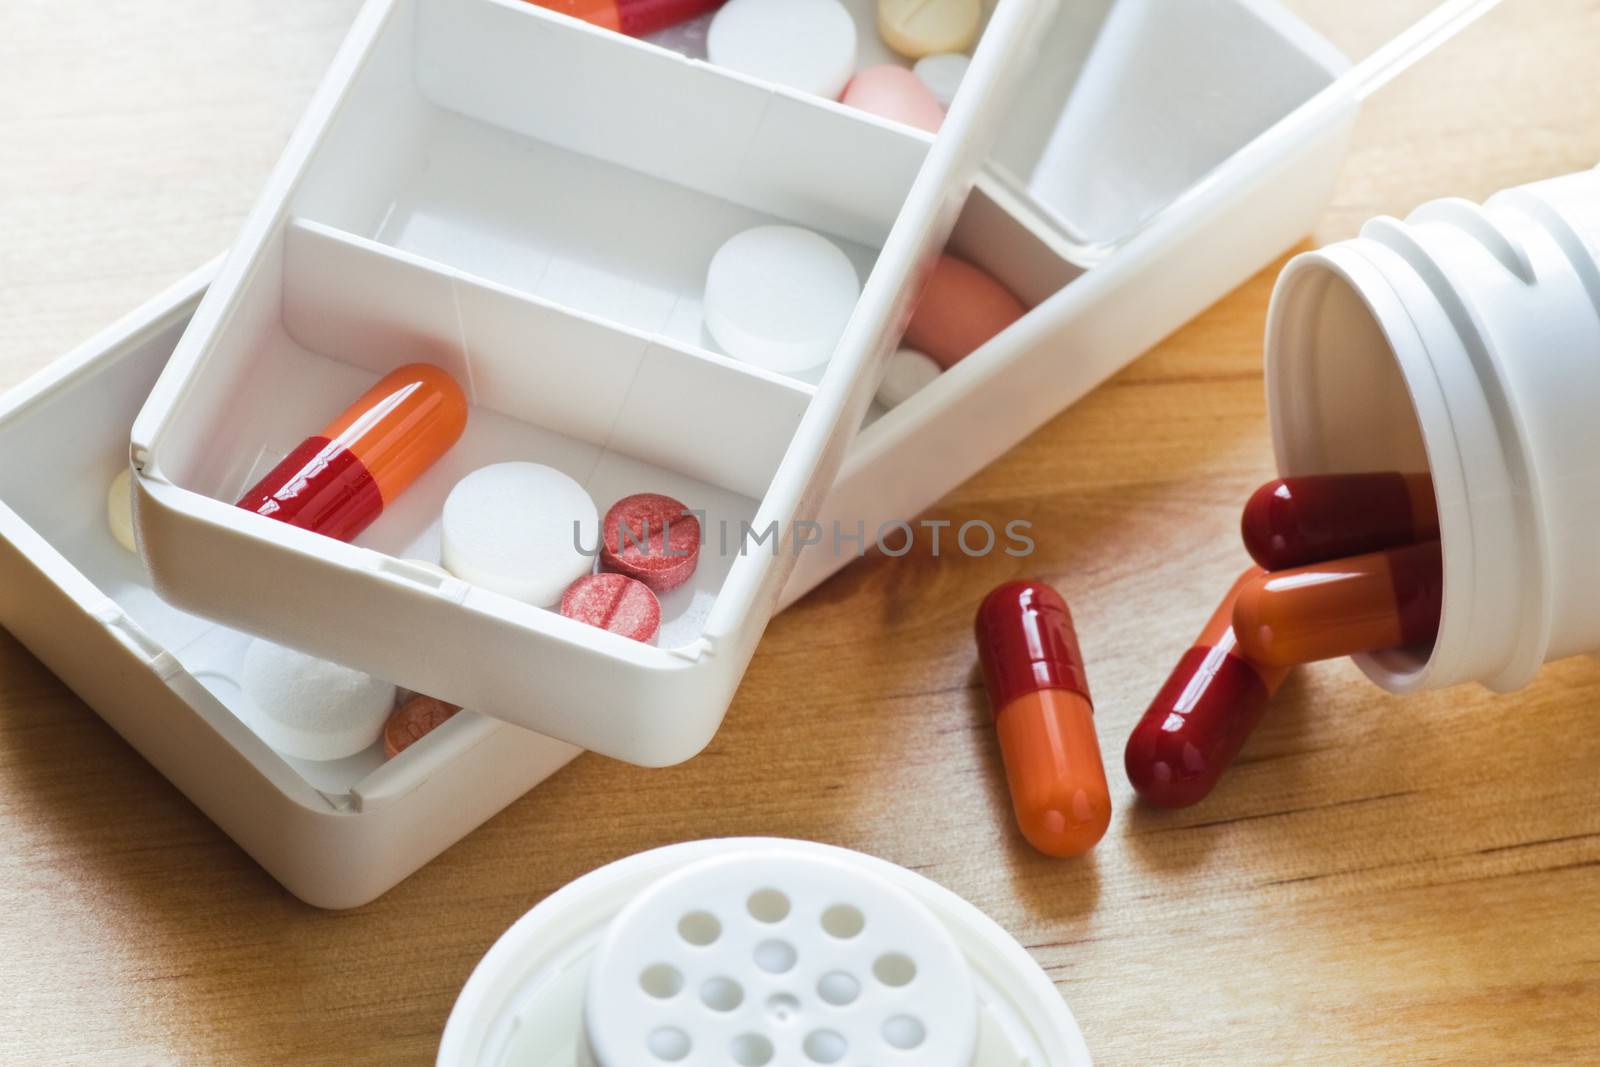 Daily medication - pills and capsules sorted out in pillboxes